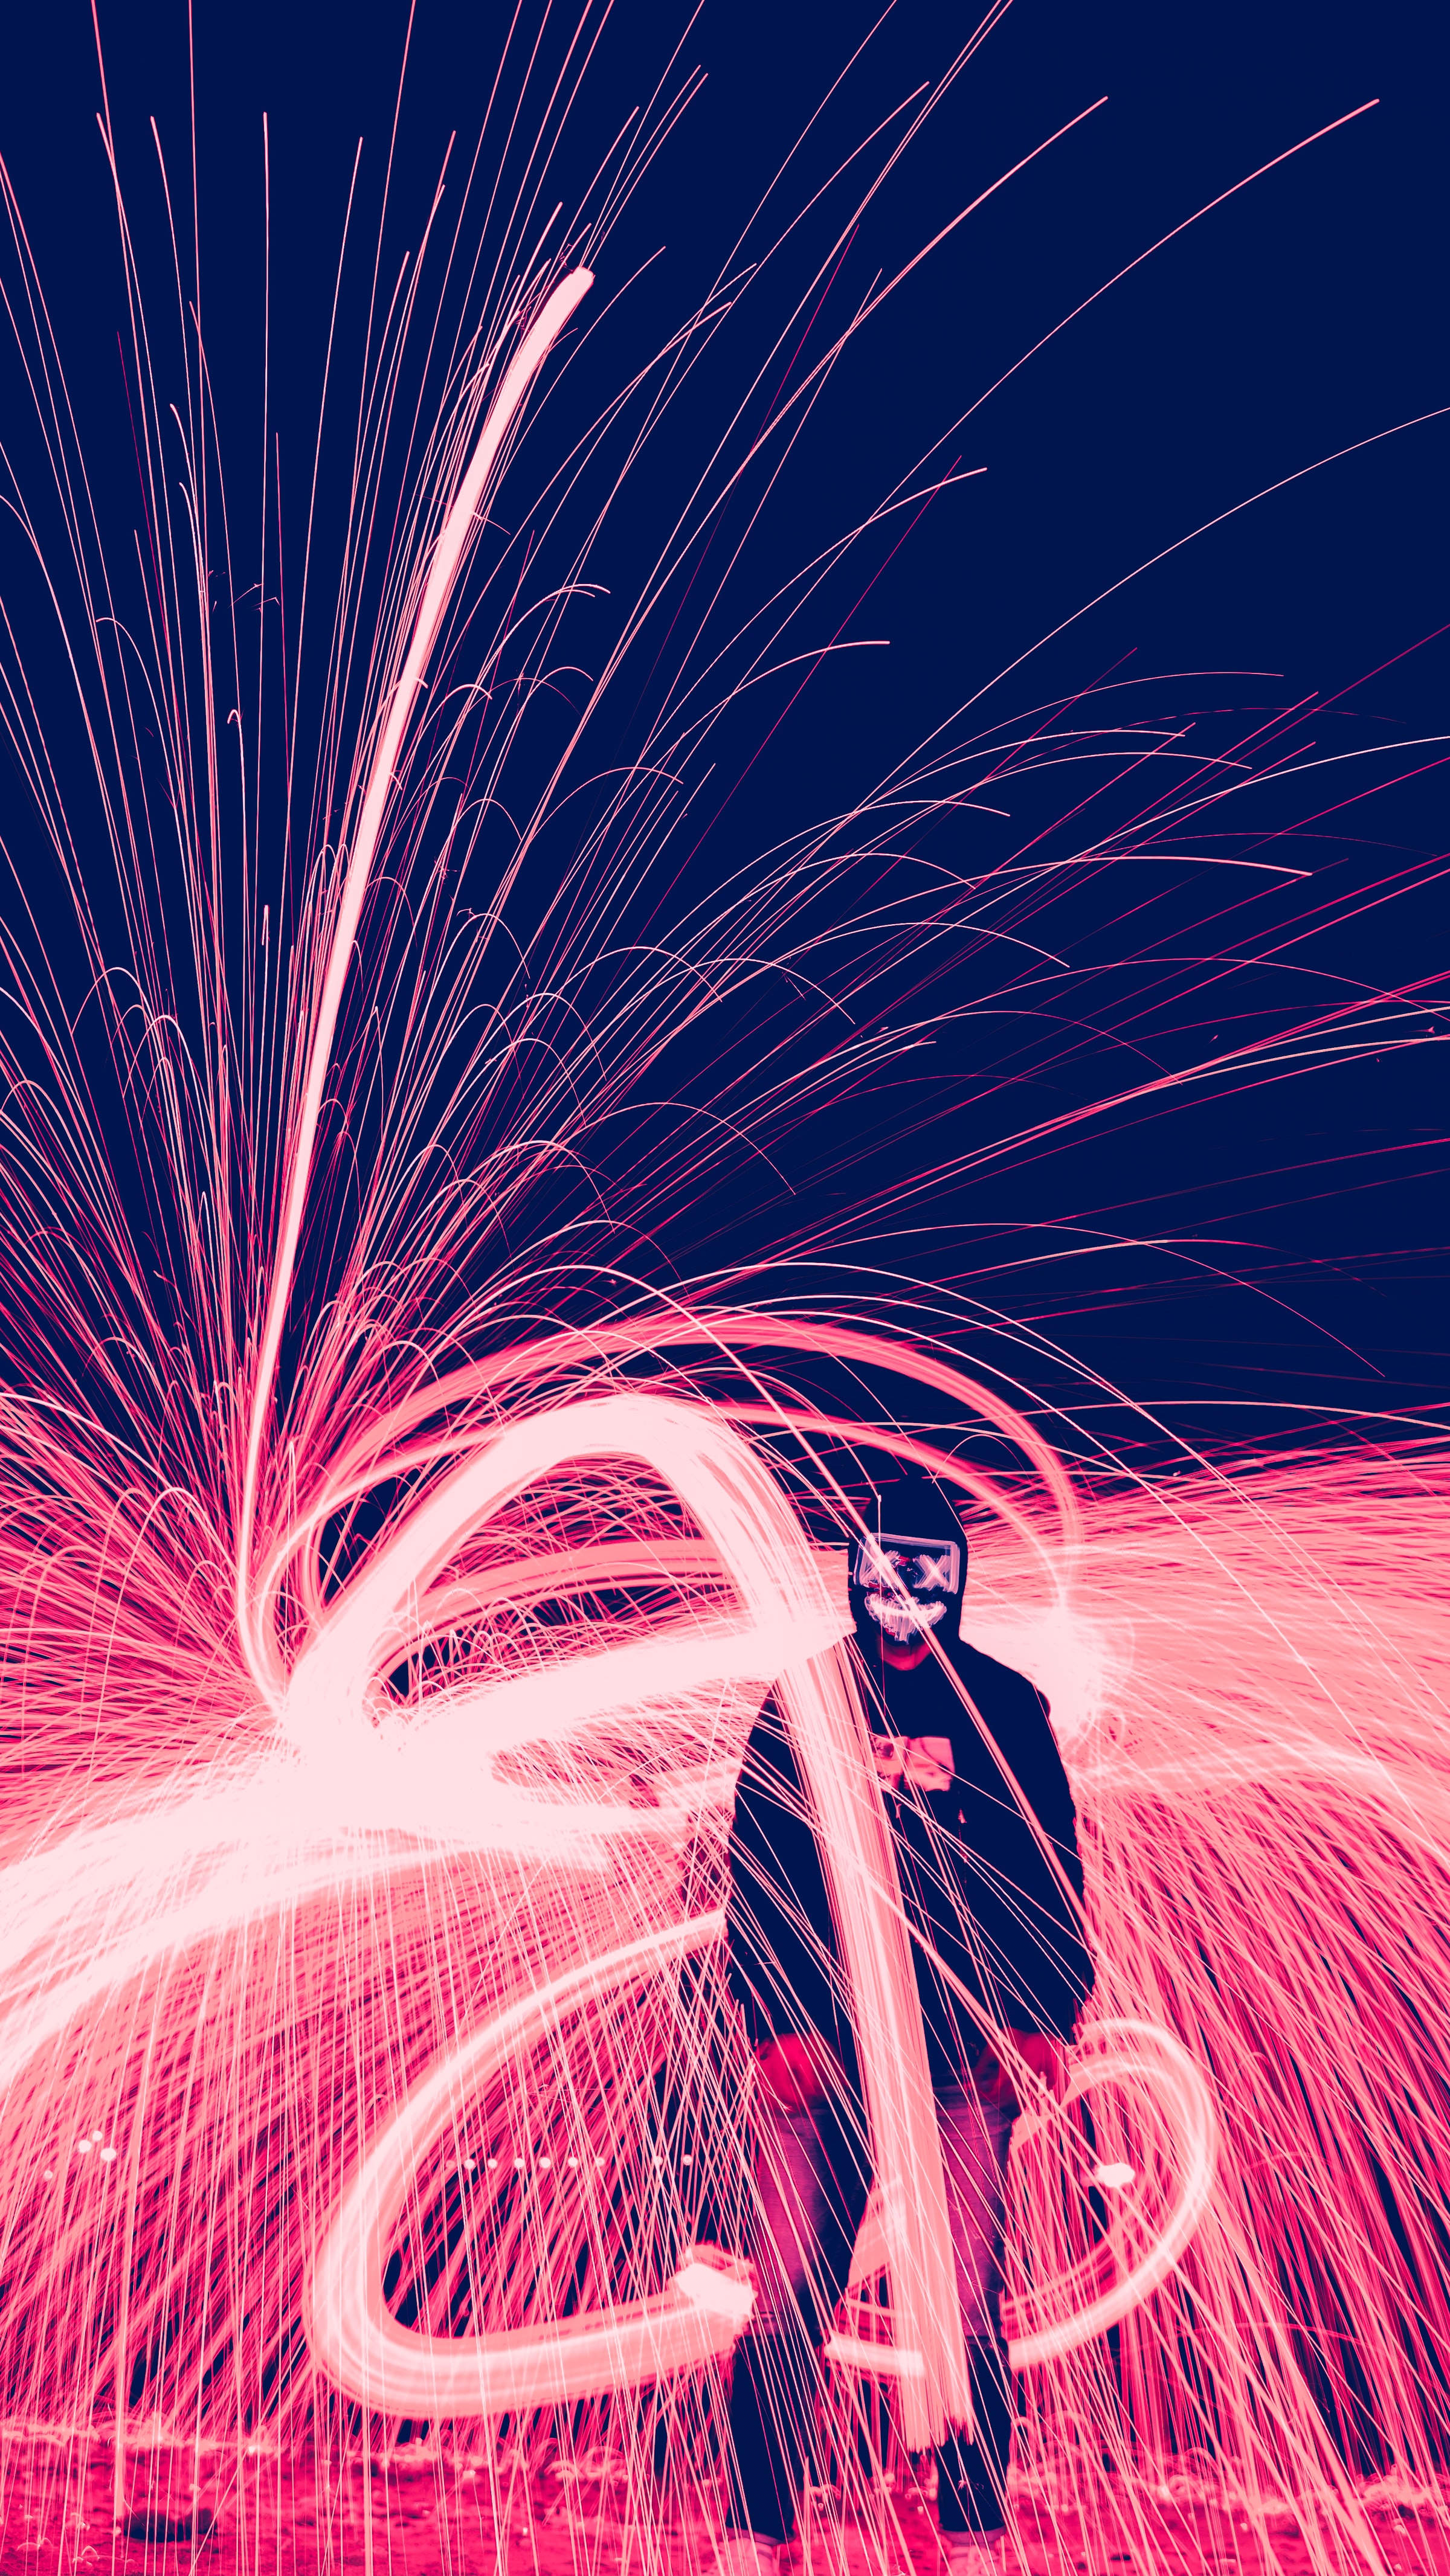 mask, sparks, miscellanea, miscellaneous, neon, freezelight, human, person iphone wallpaper